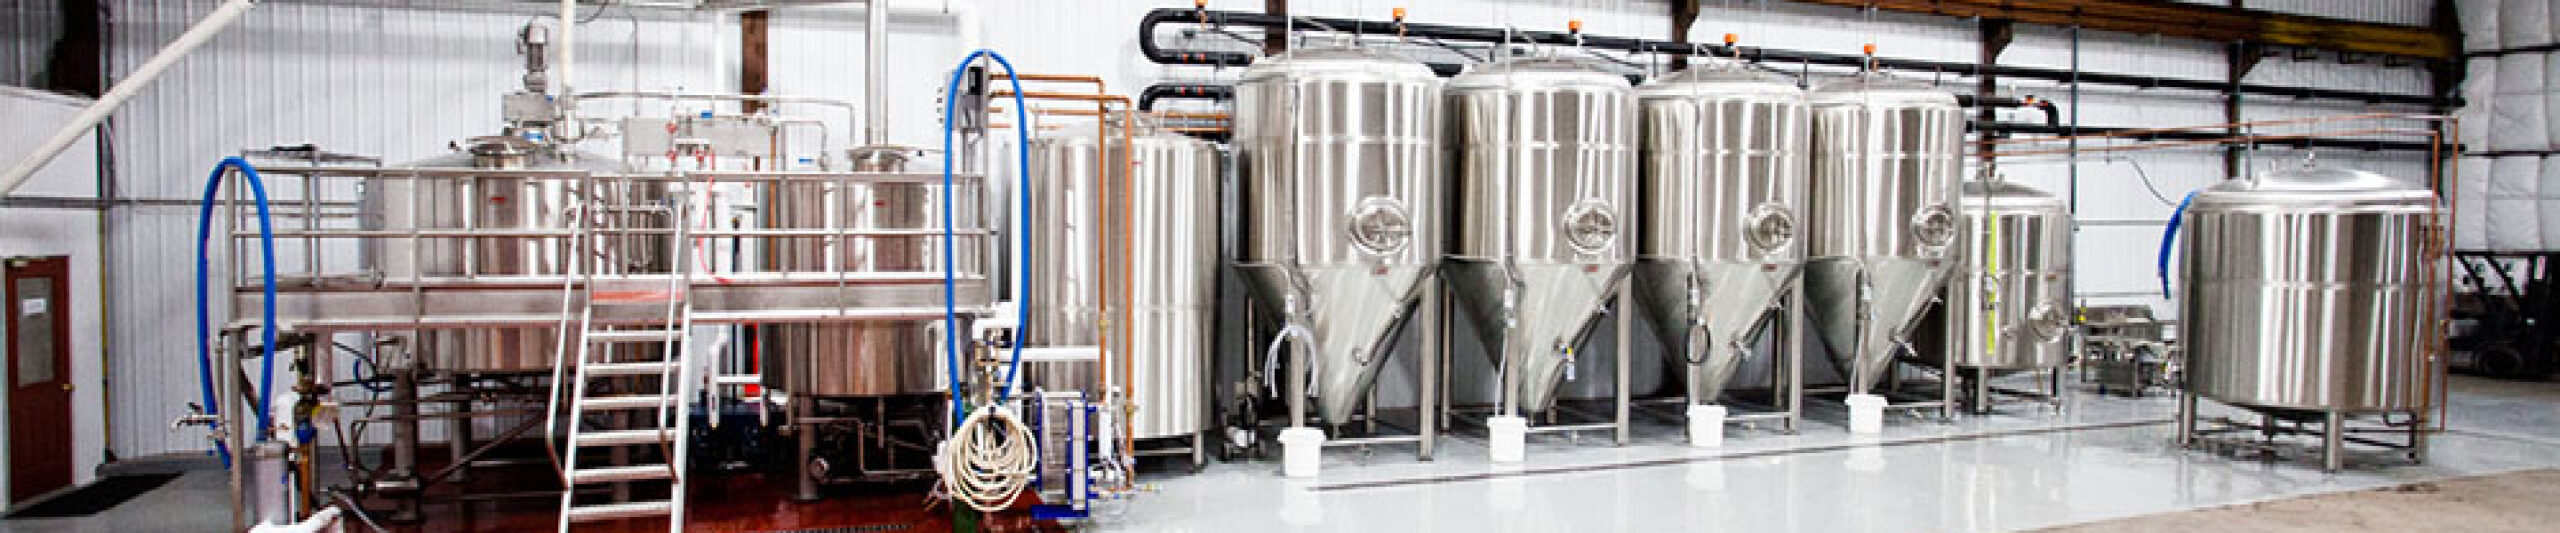 Brewery metal containers